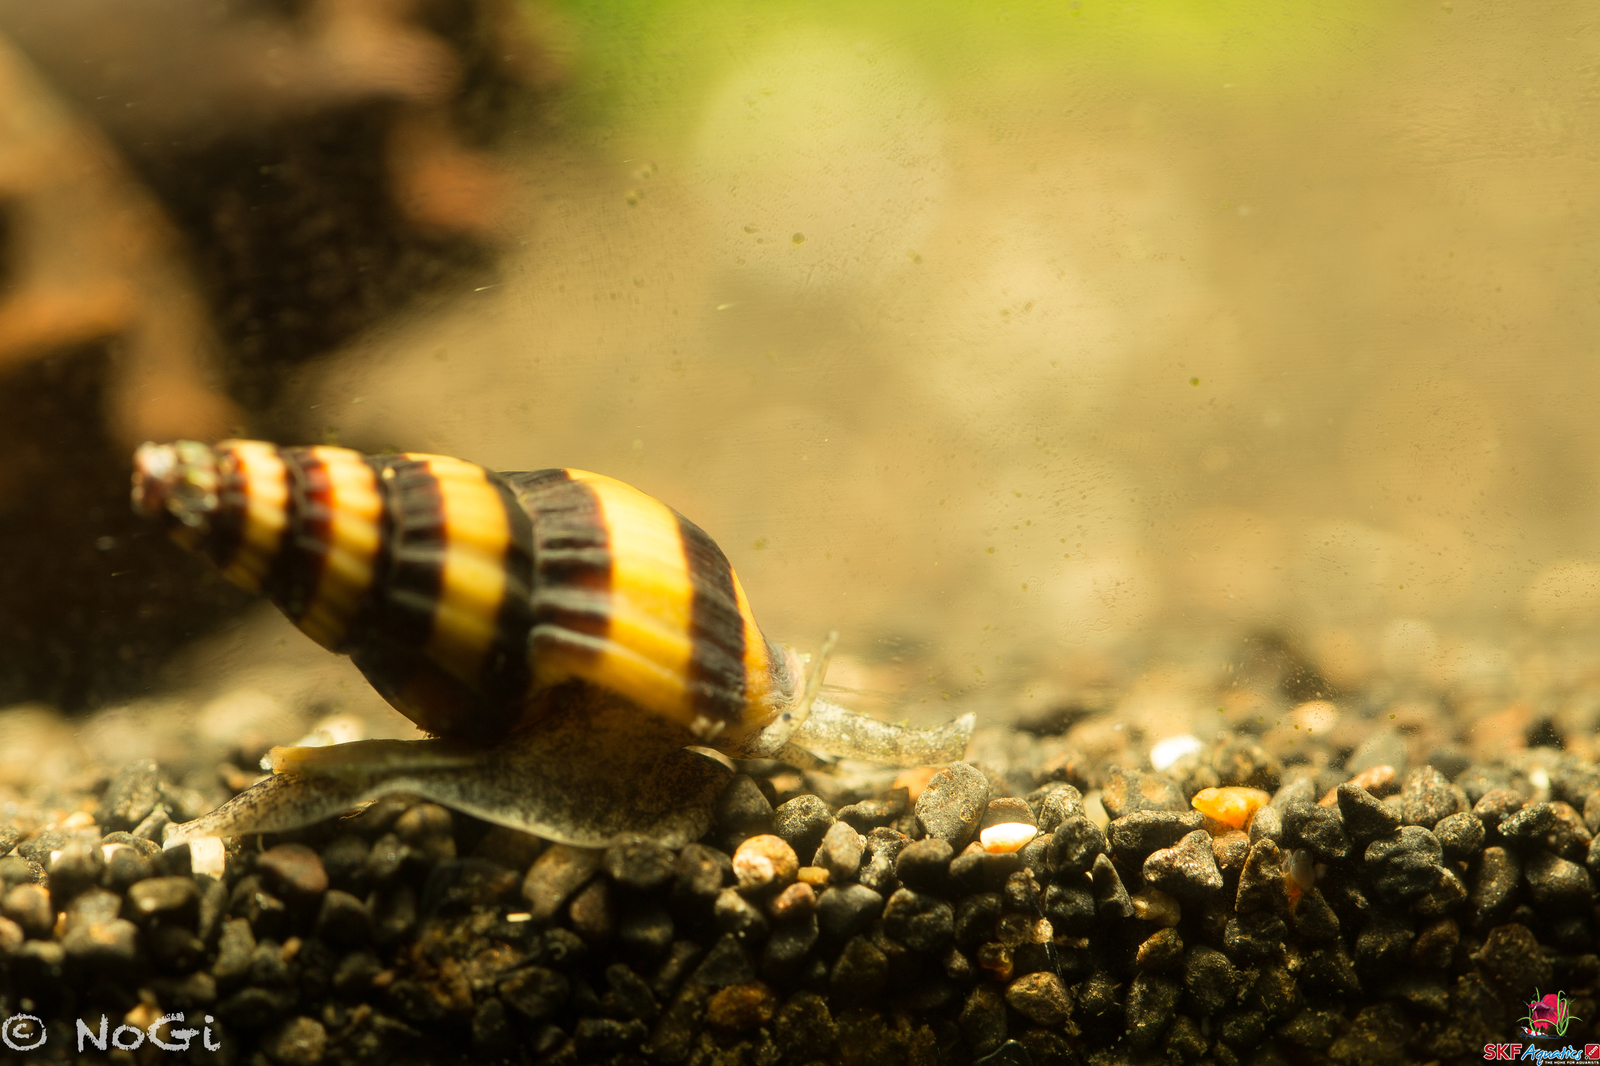 More information about "Clea helena - Assassin Snail"